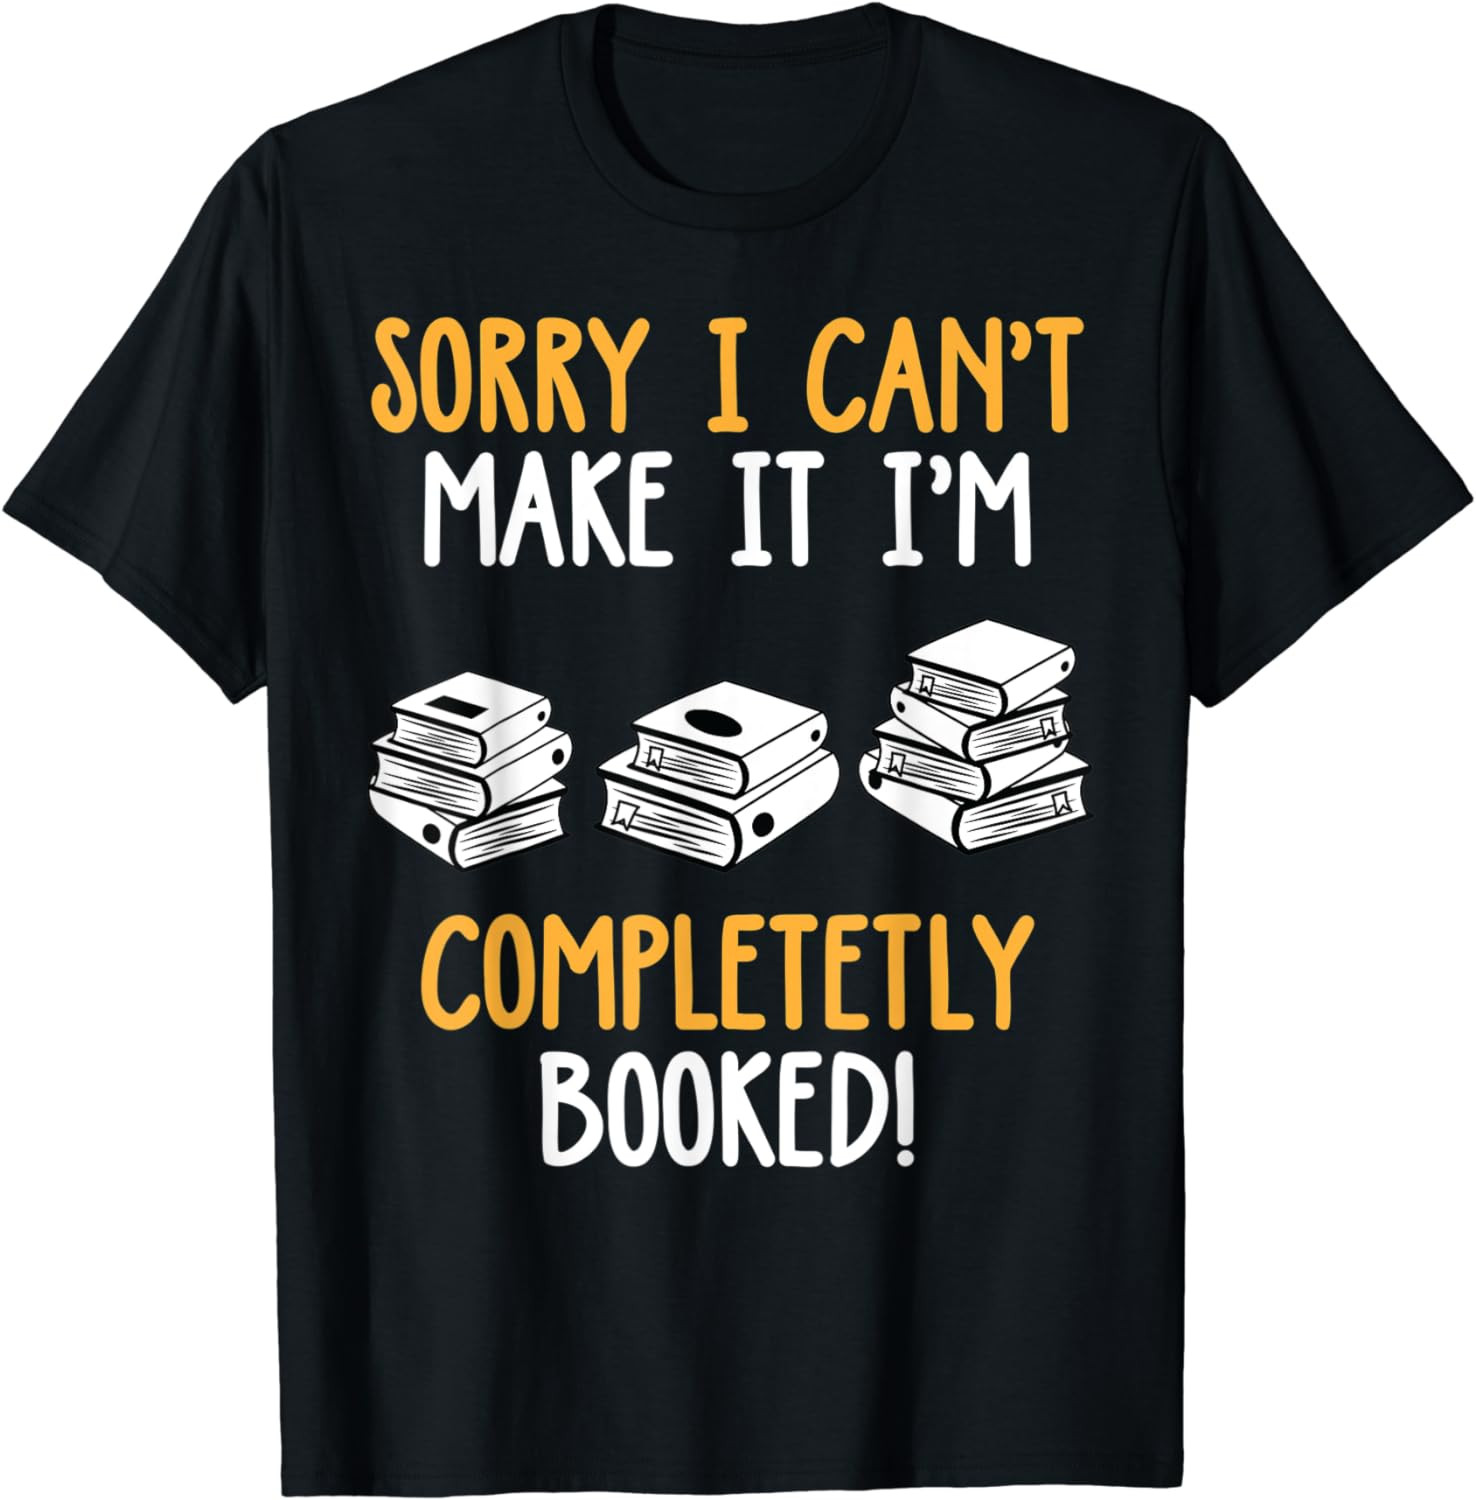 Sorry I Can't Make It I'm Completely Booked! Reading Shirt T-Shirt